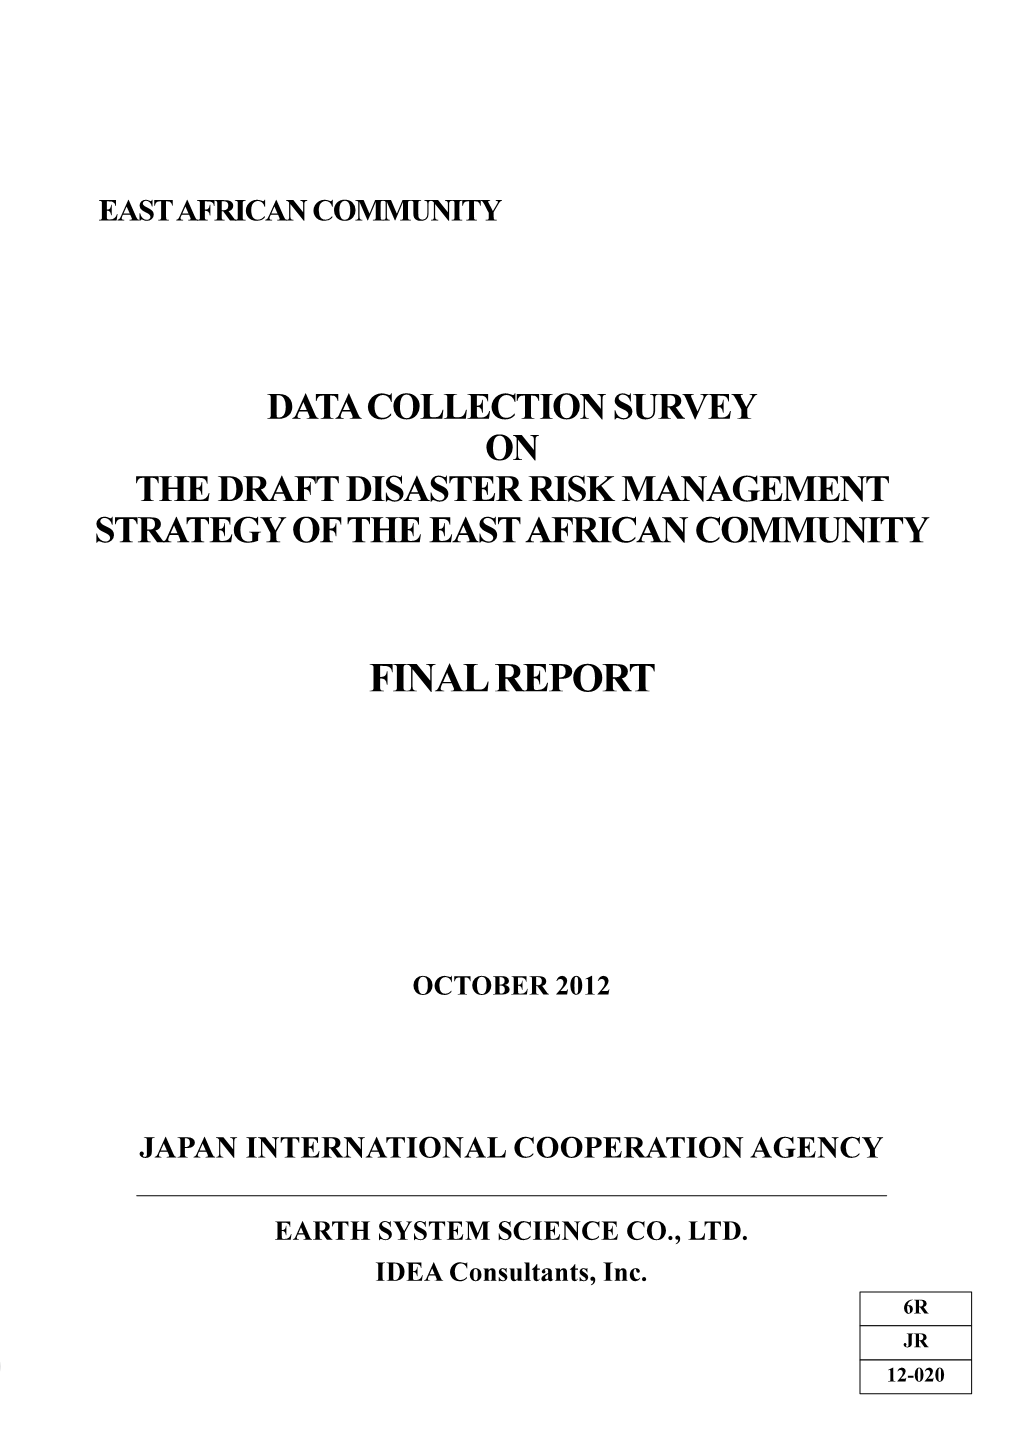 Final Report Report Final Earth System Science Co., Ltd